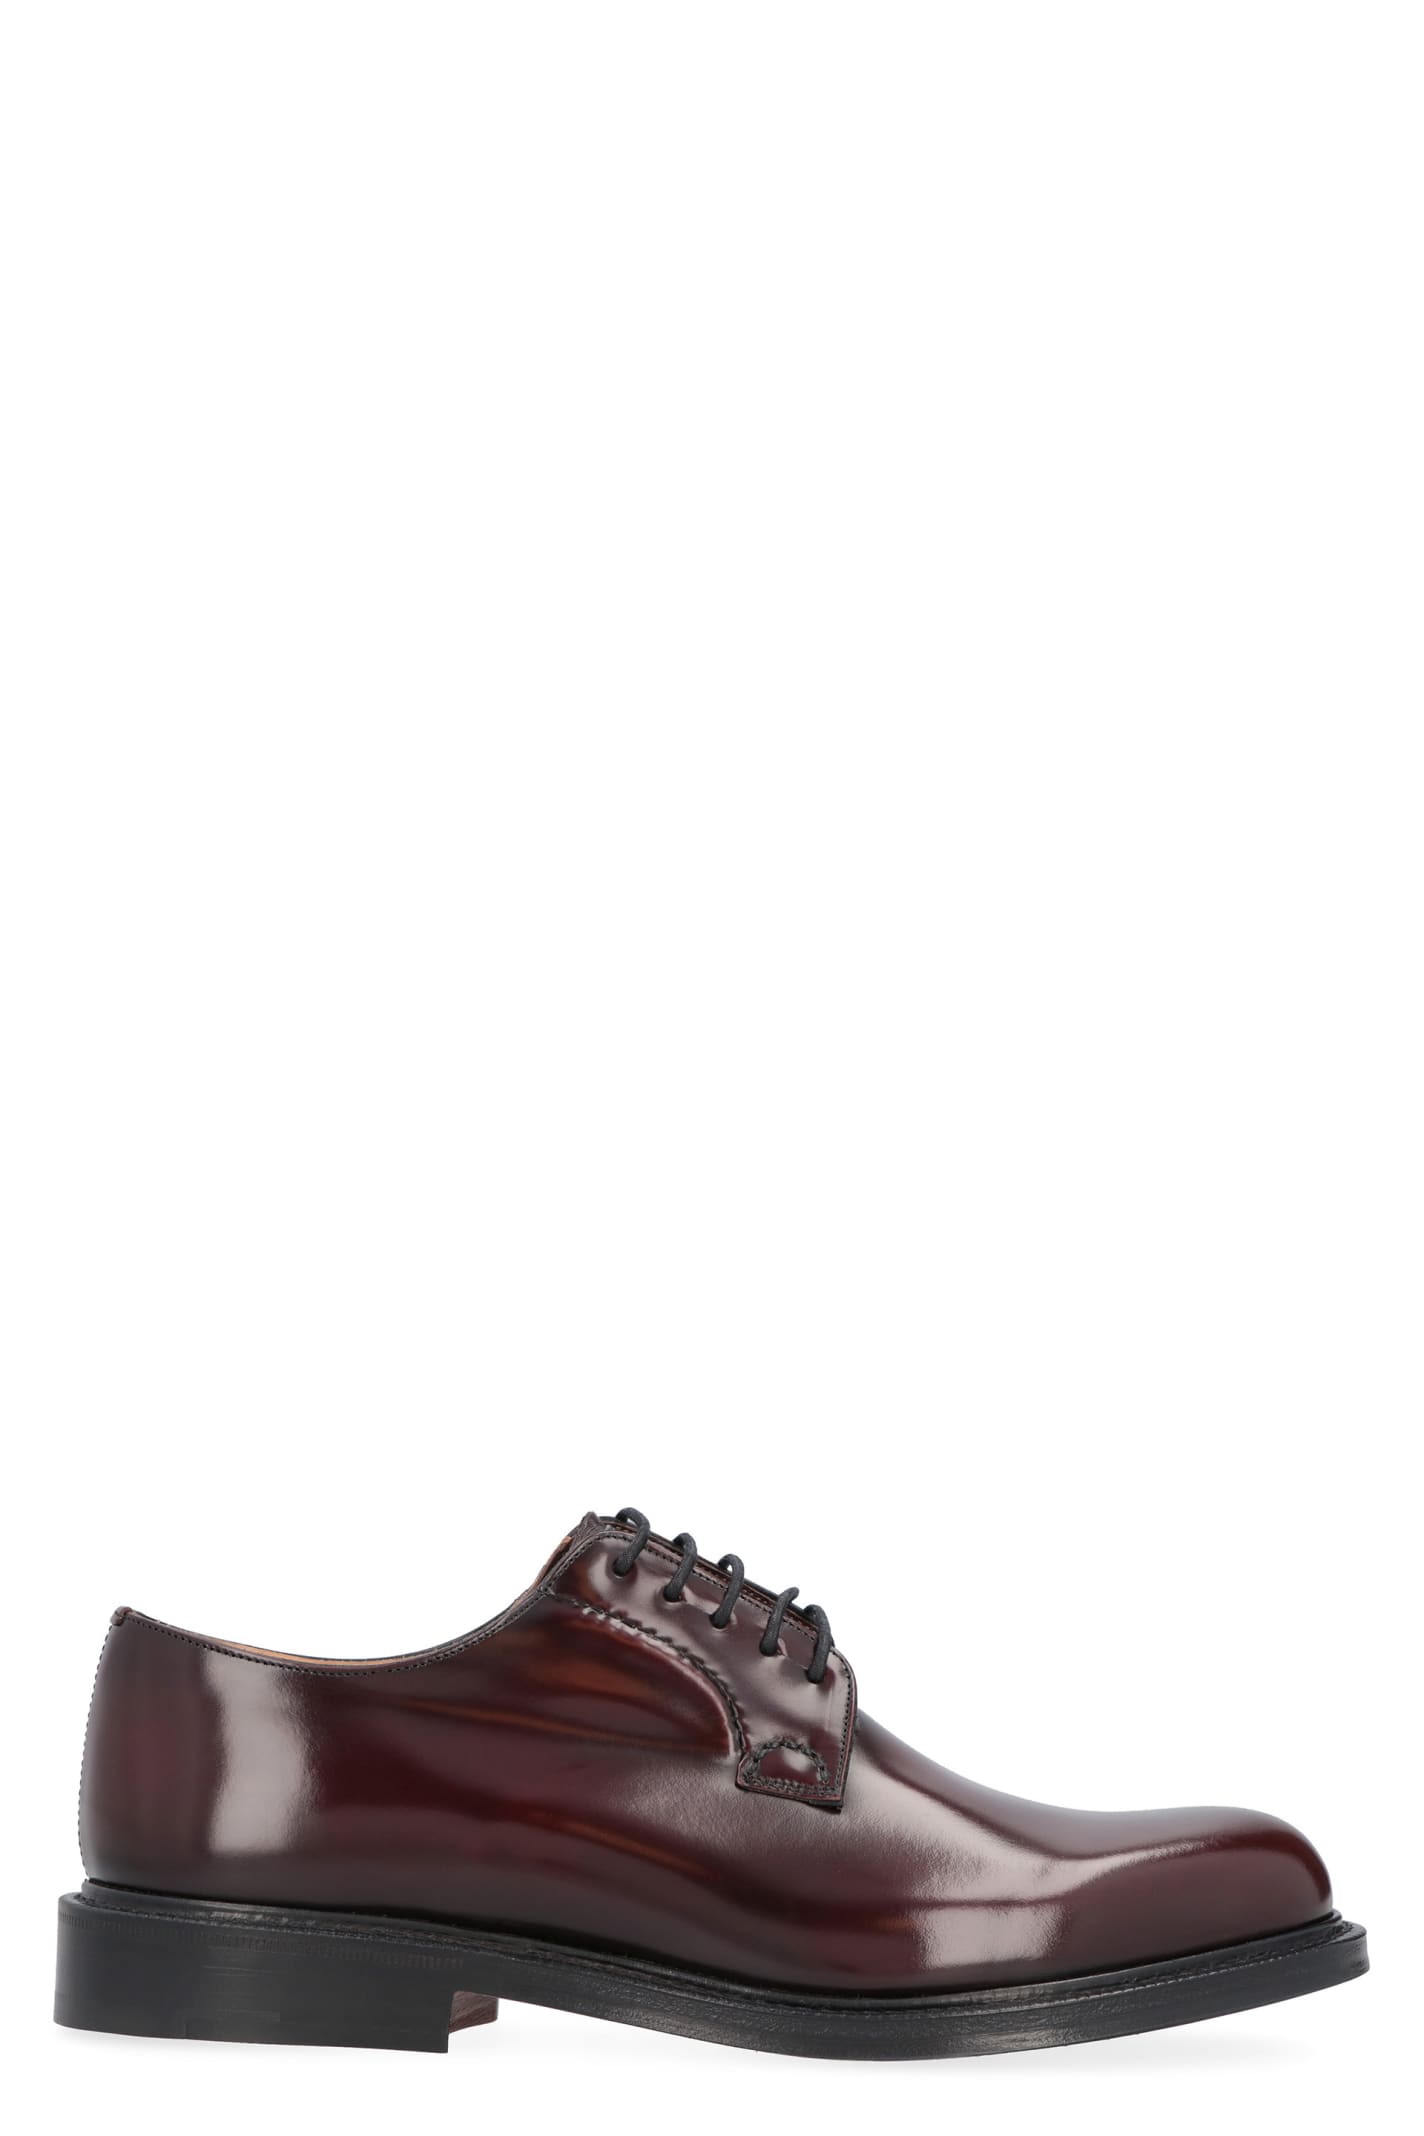 Church's Shannon Leather Lace-up Shoes